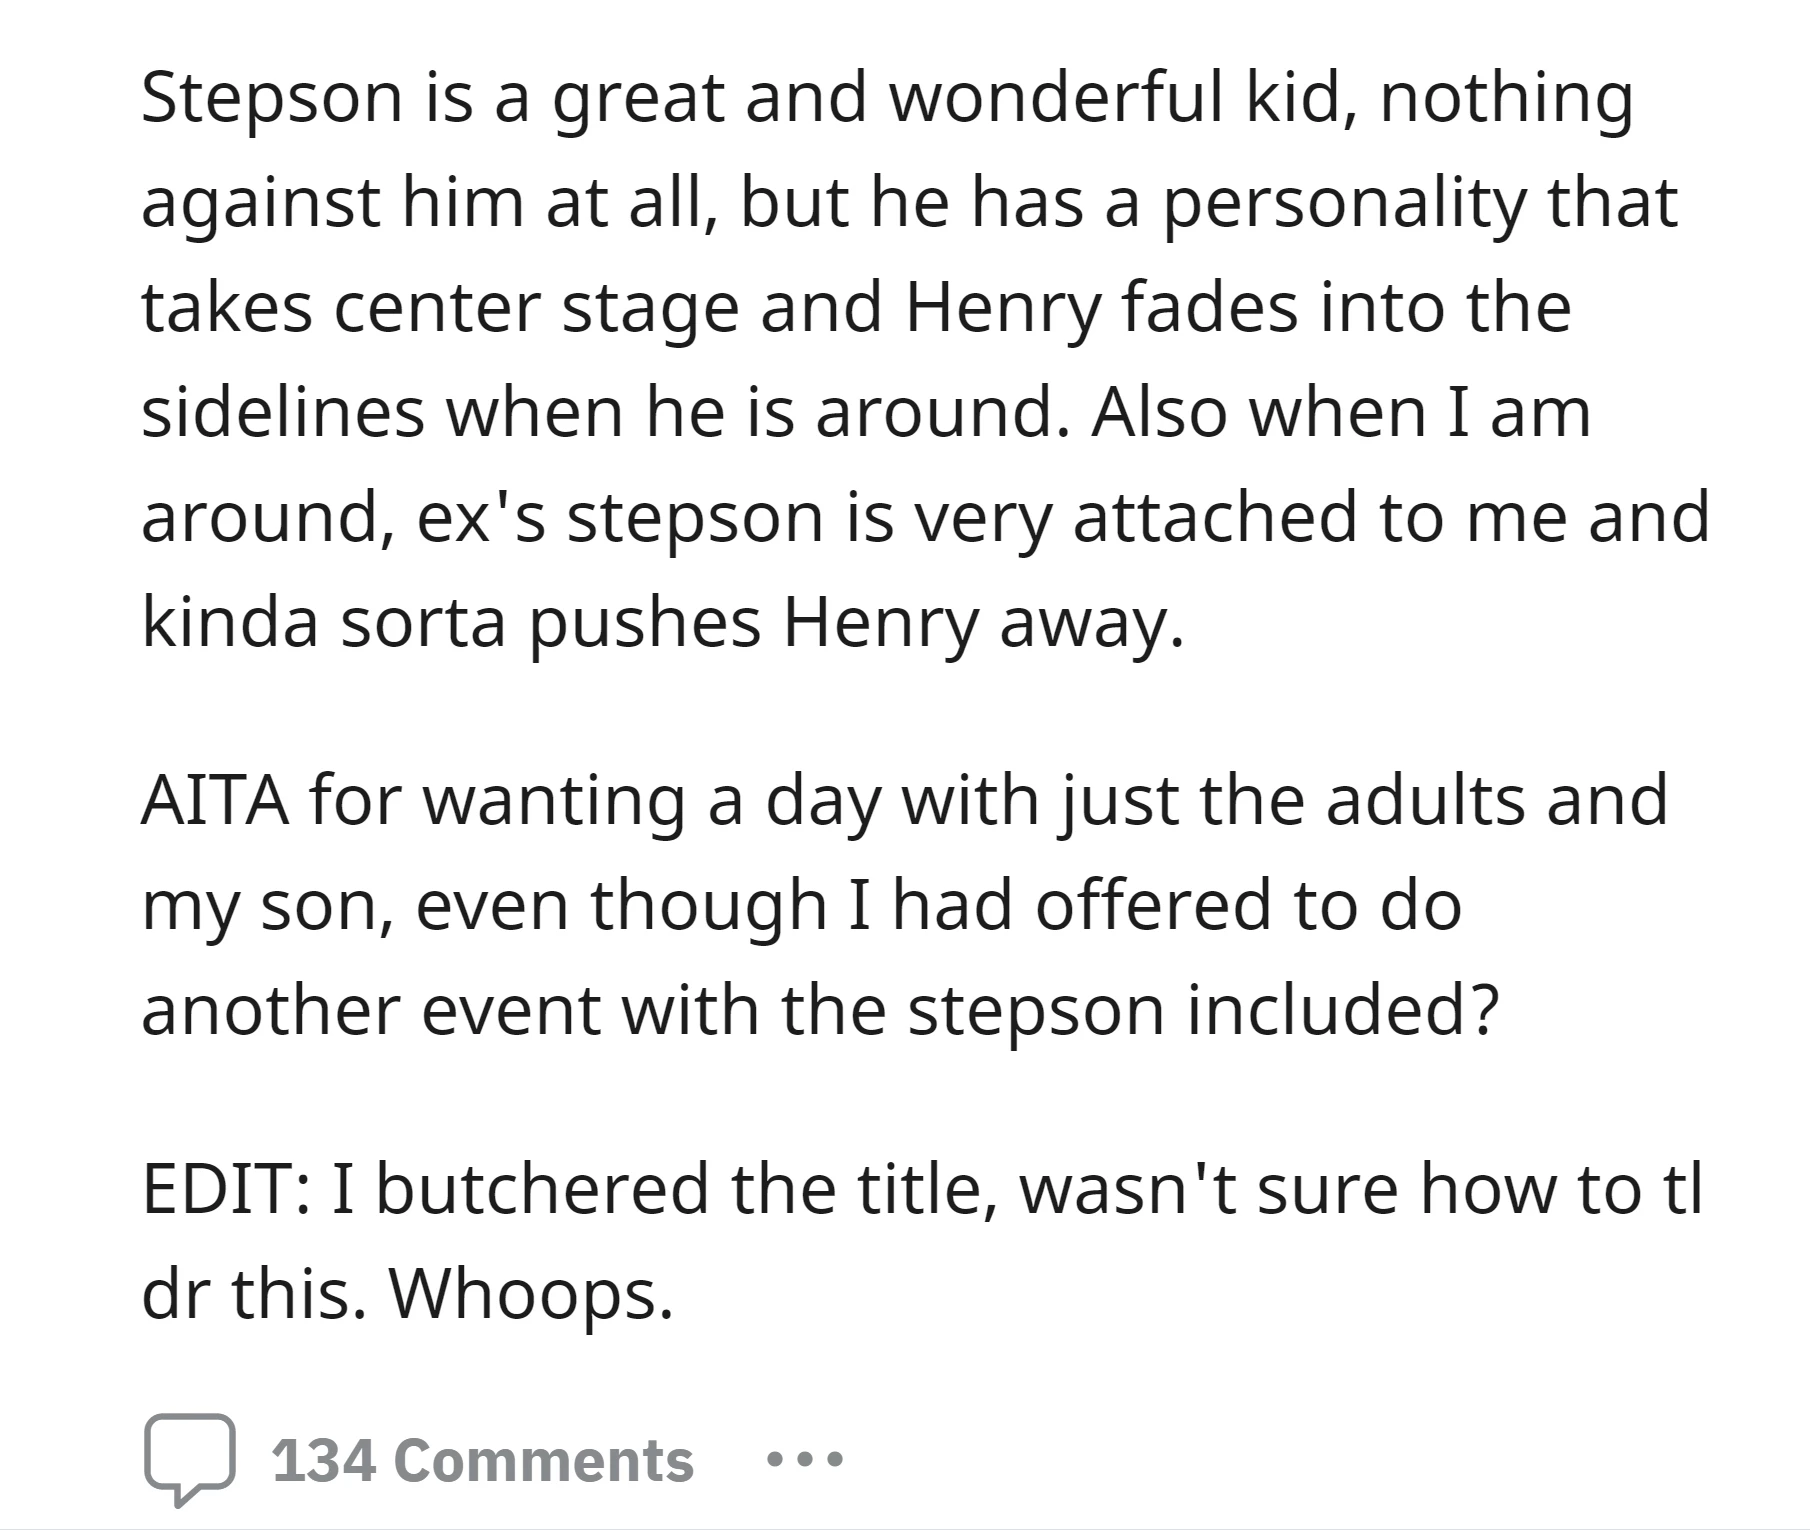 The OP is questioning if he is in the wrong for wanting a day with just the his ex and their son